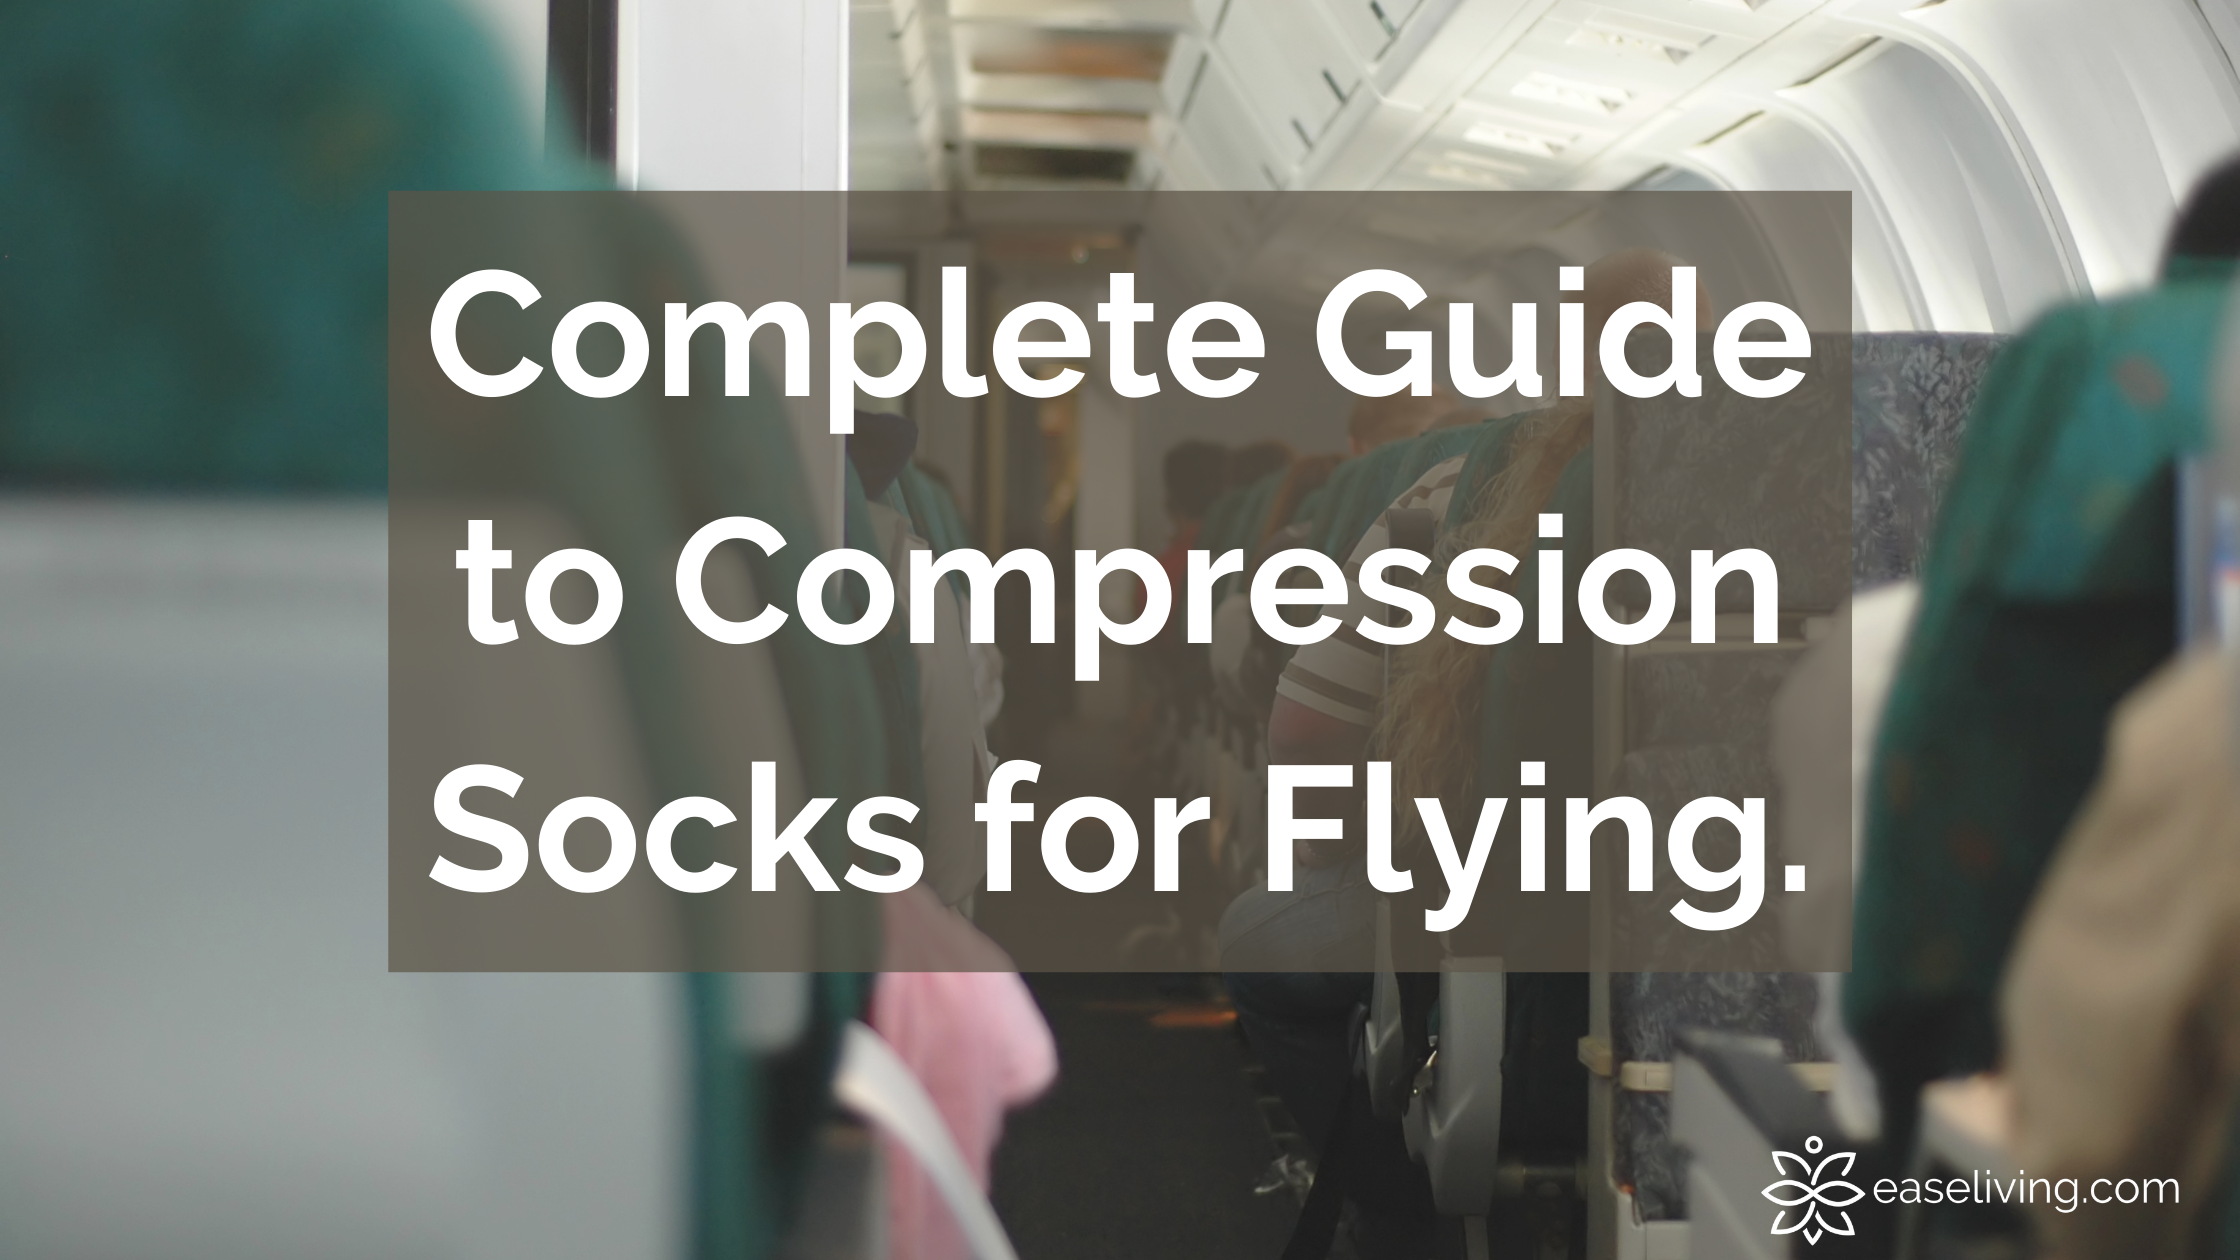 What Level of Compression Socks Do I Need? (mmHG Guide!)